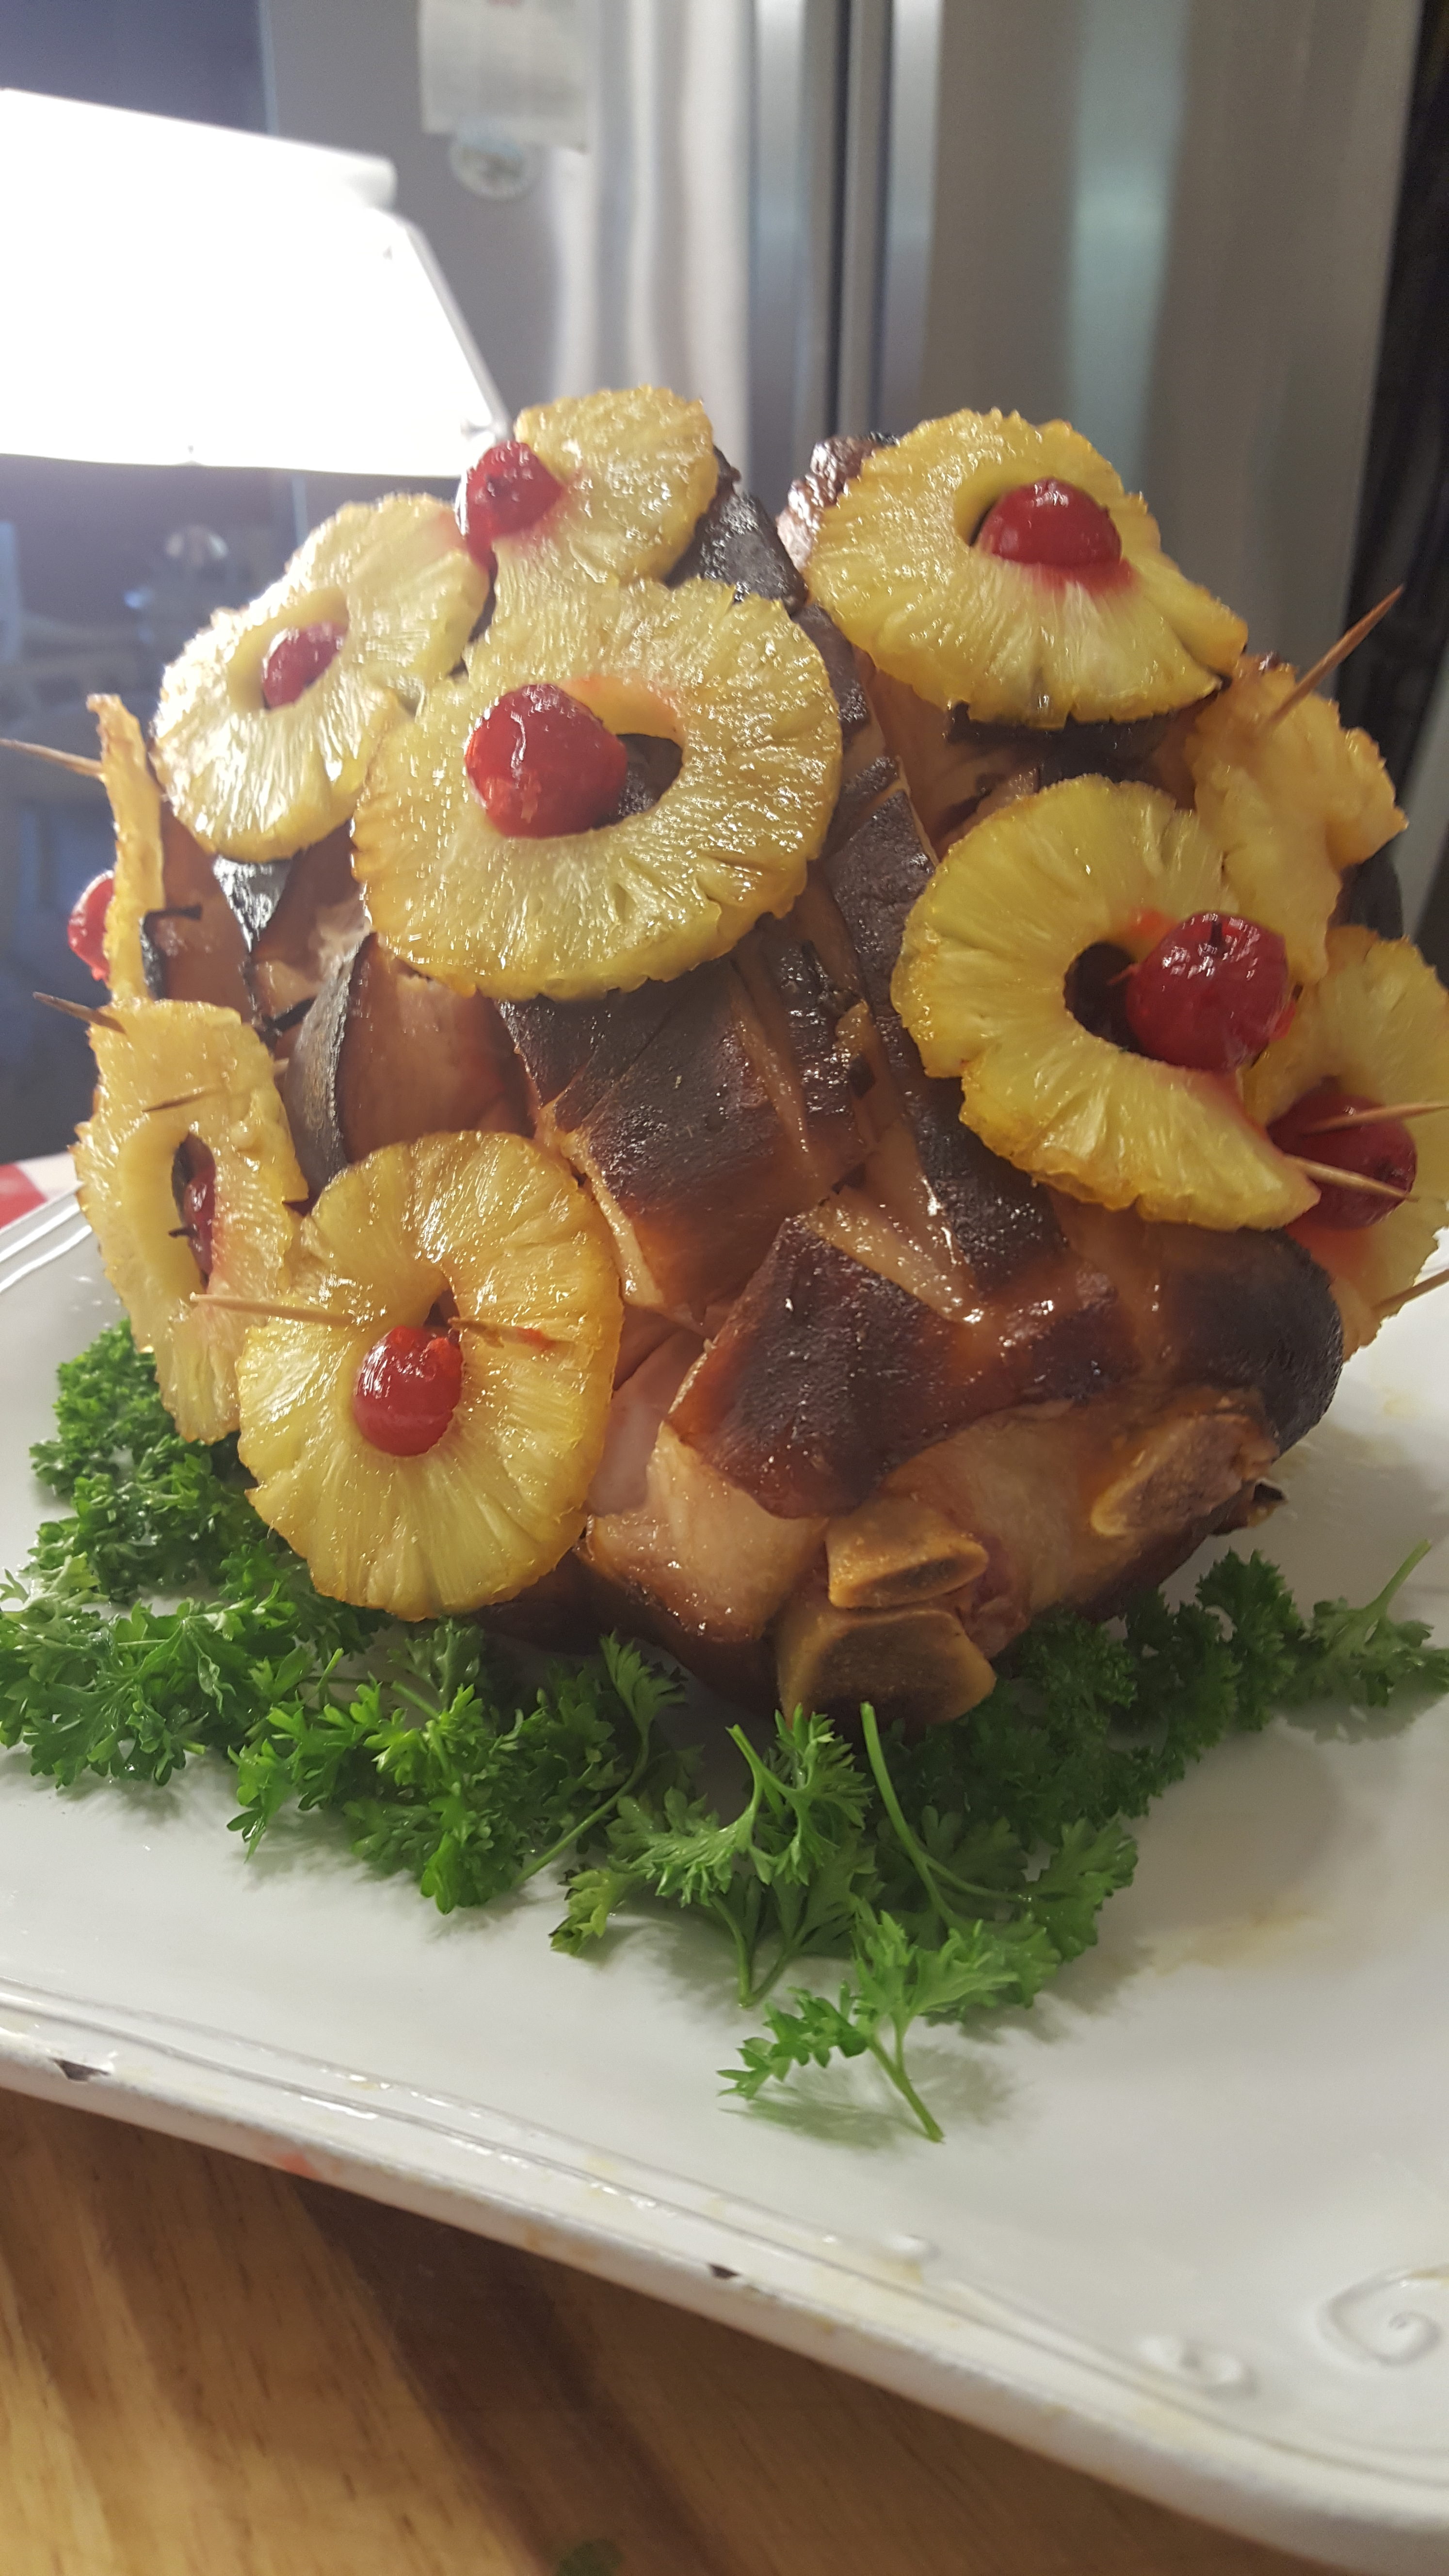 A pineapple and bacon dish on top of green parsley.